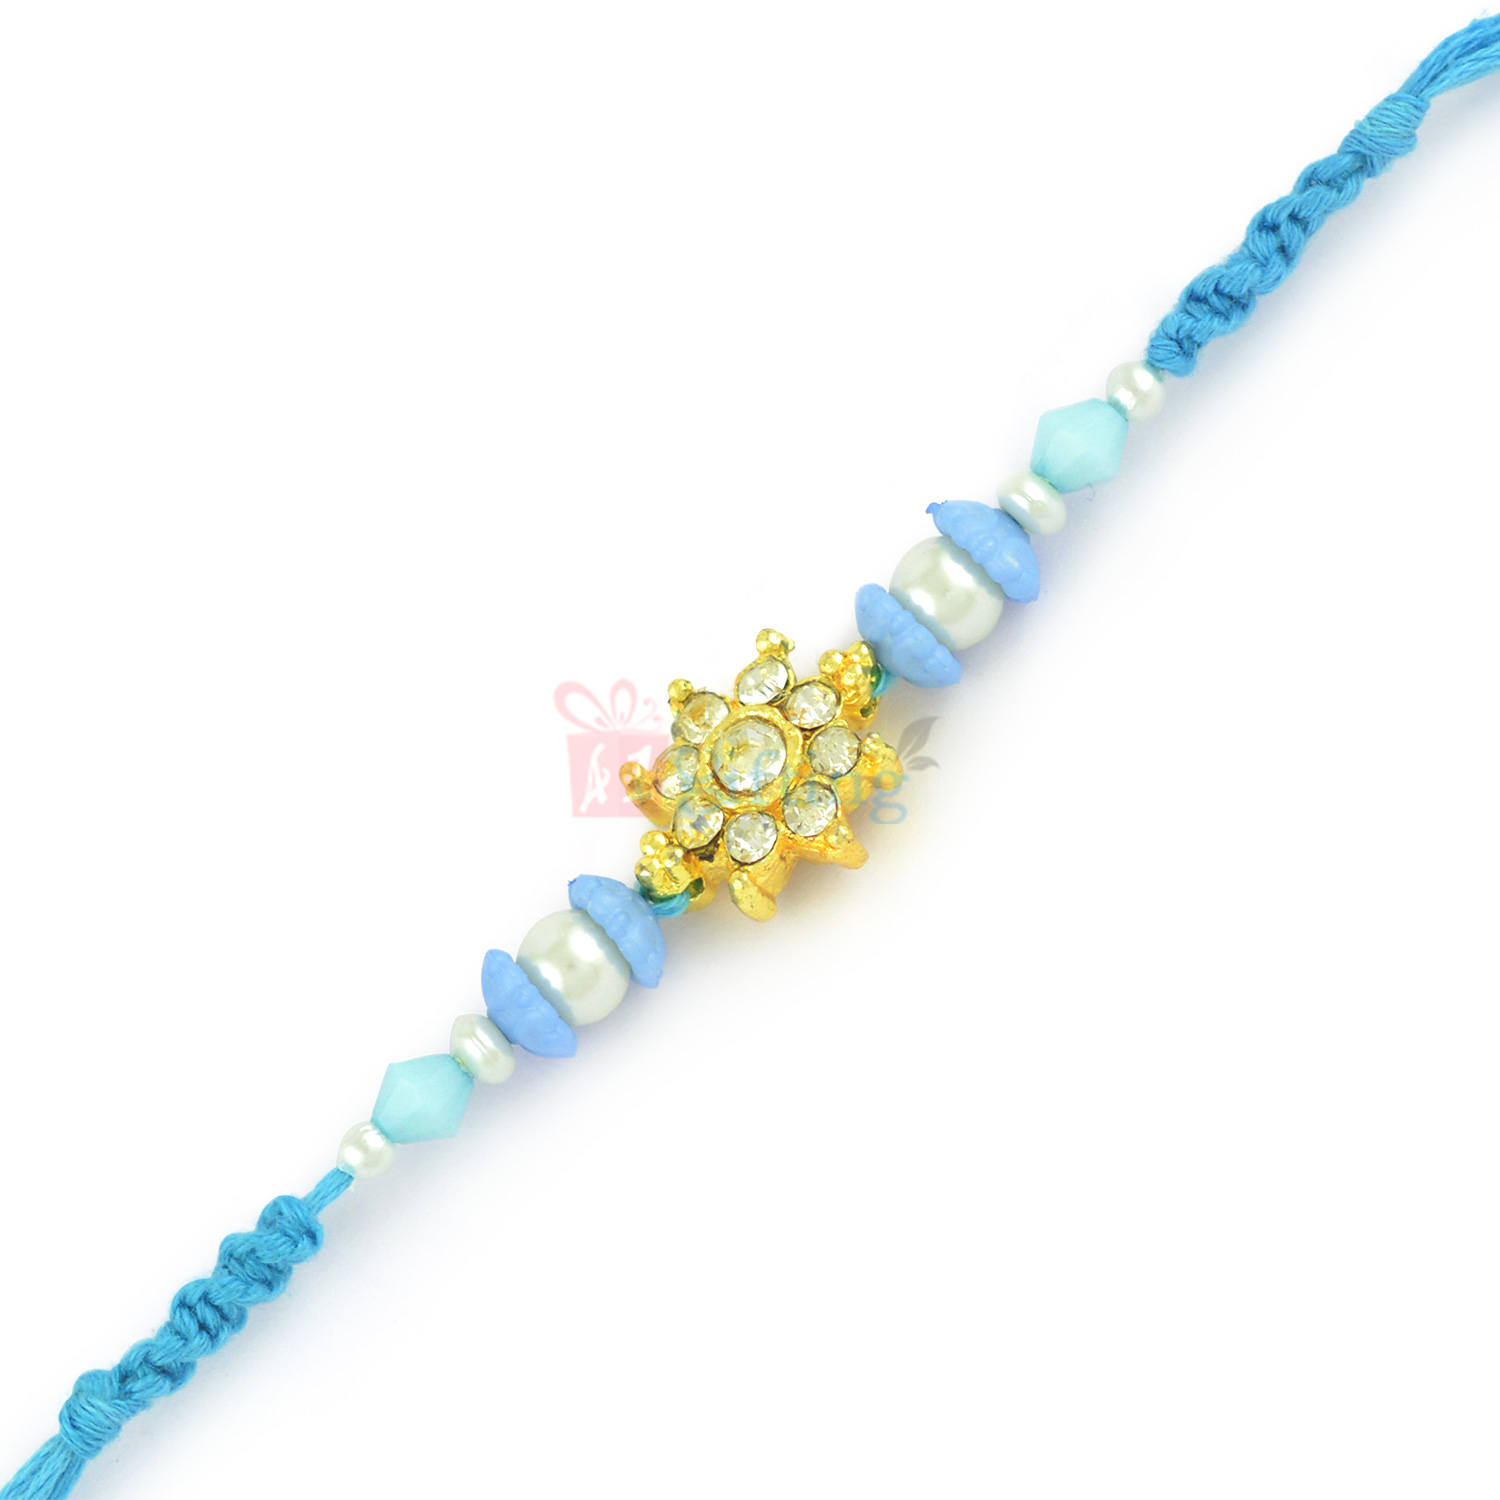 Awesome Jewel Golden Floral with Beads Thread Rakhi